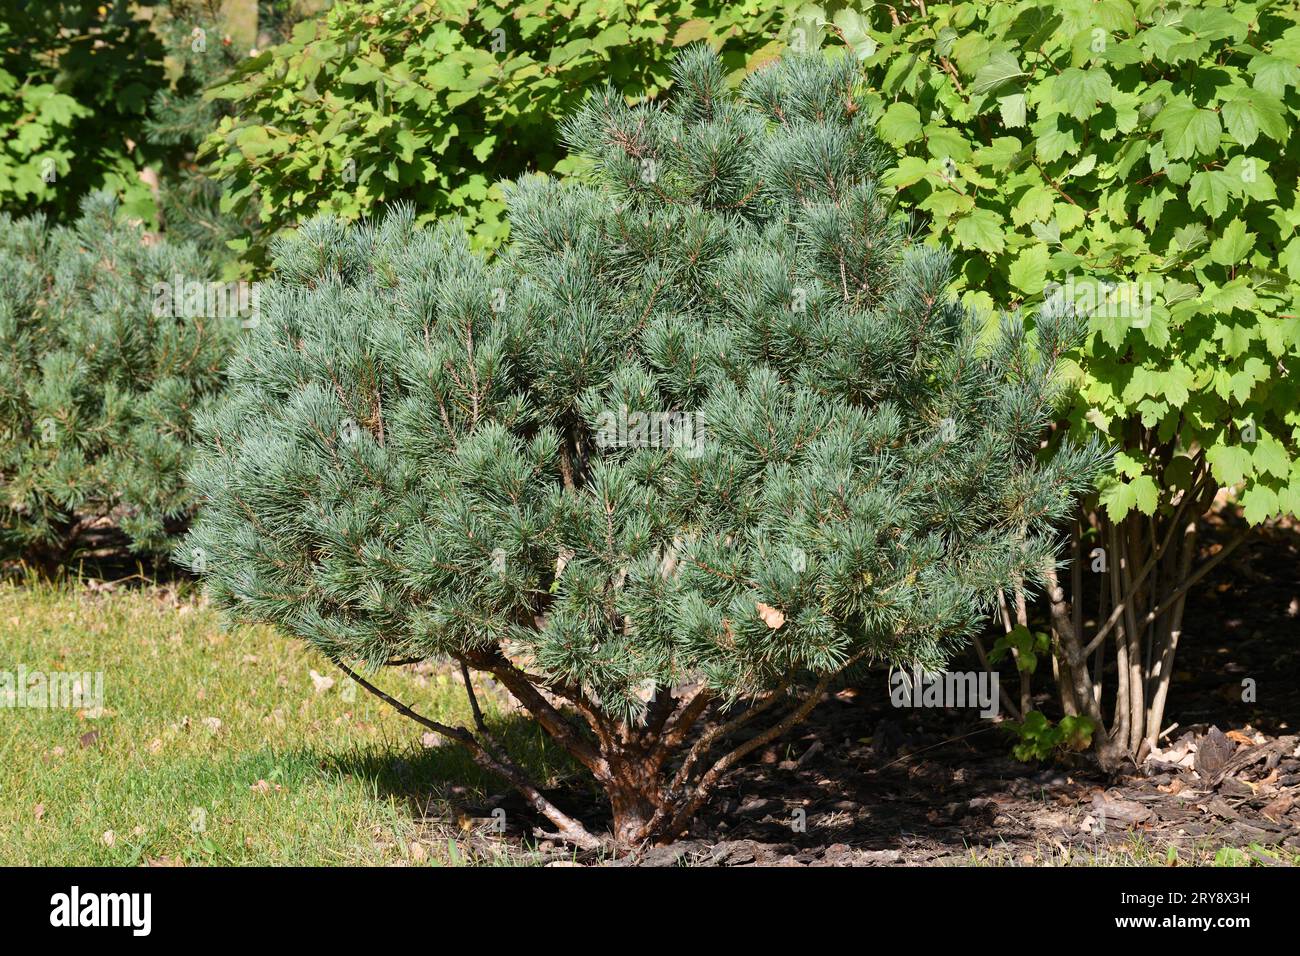 Young small pine tree in park Stock Photo